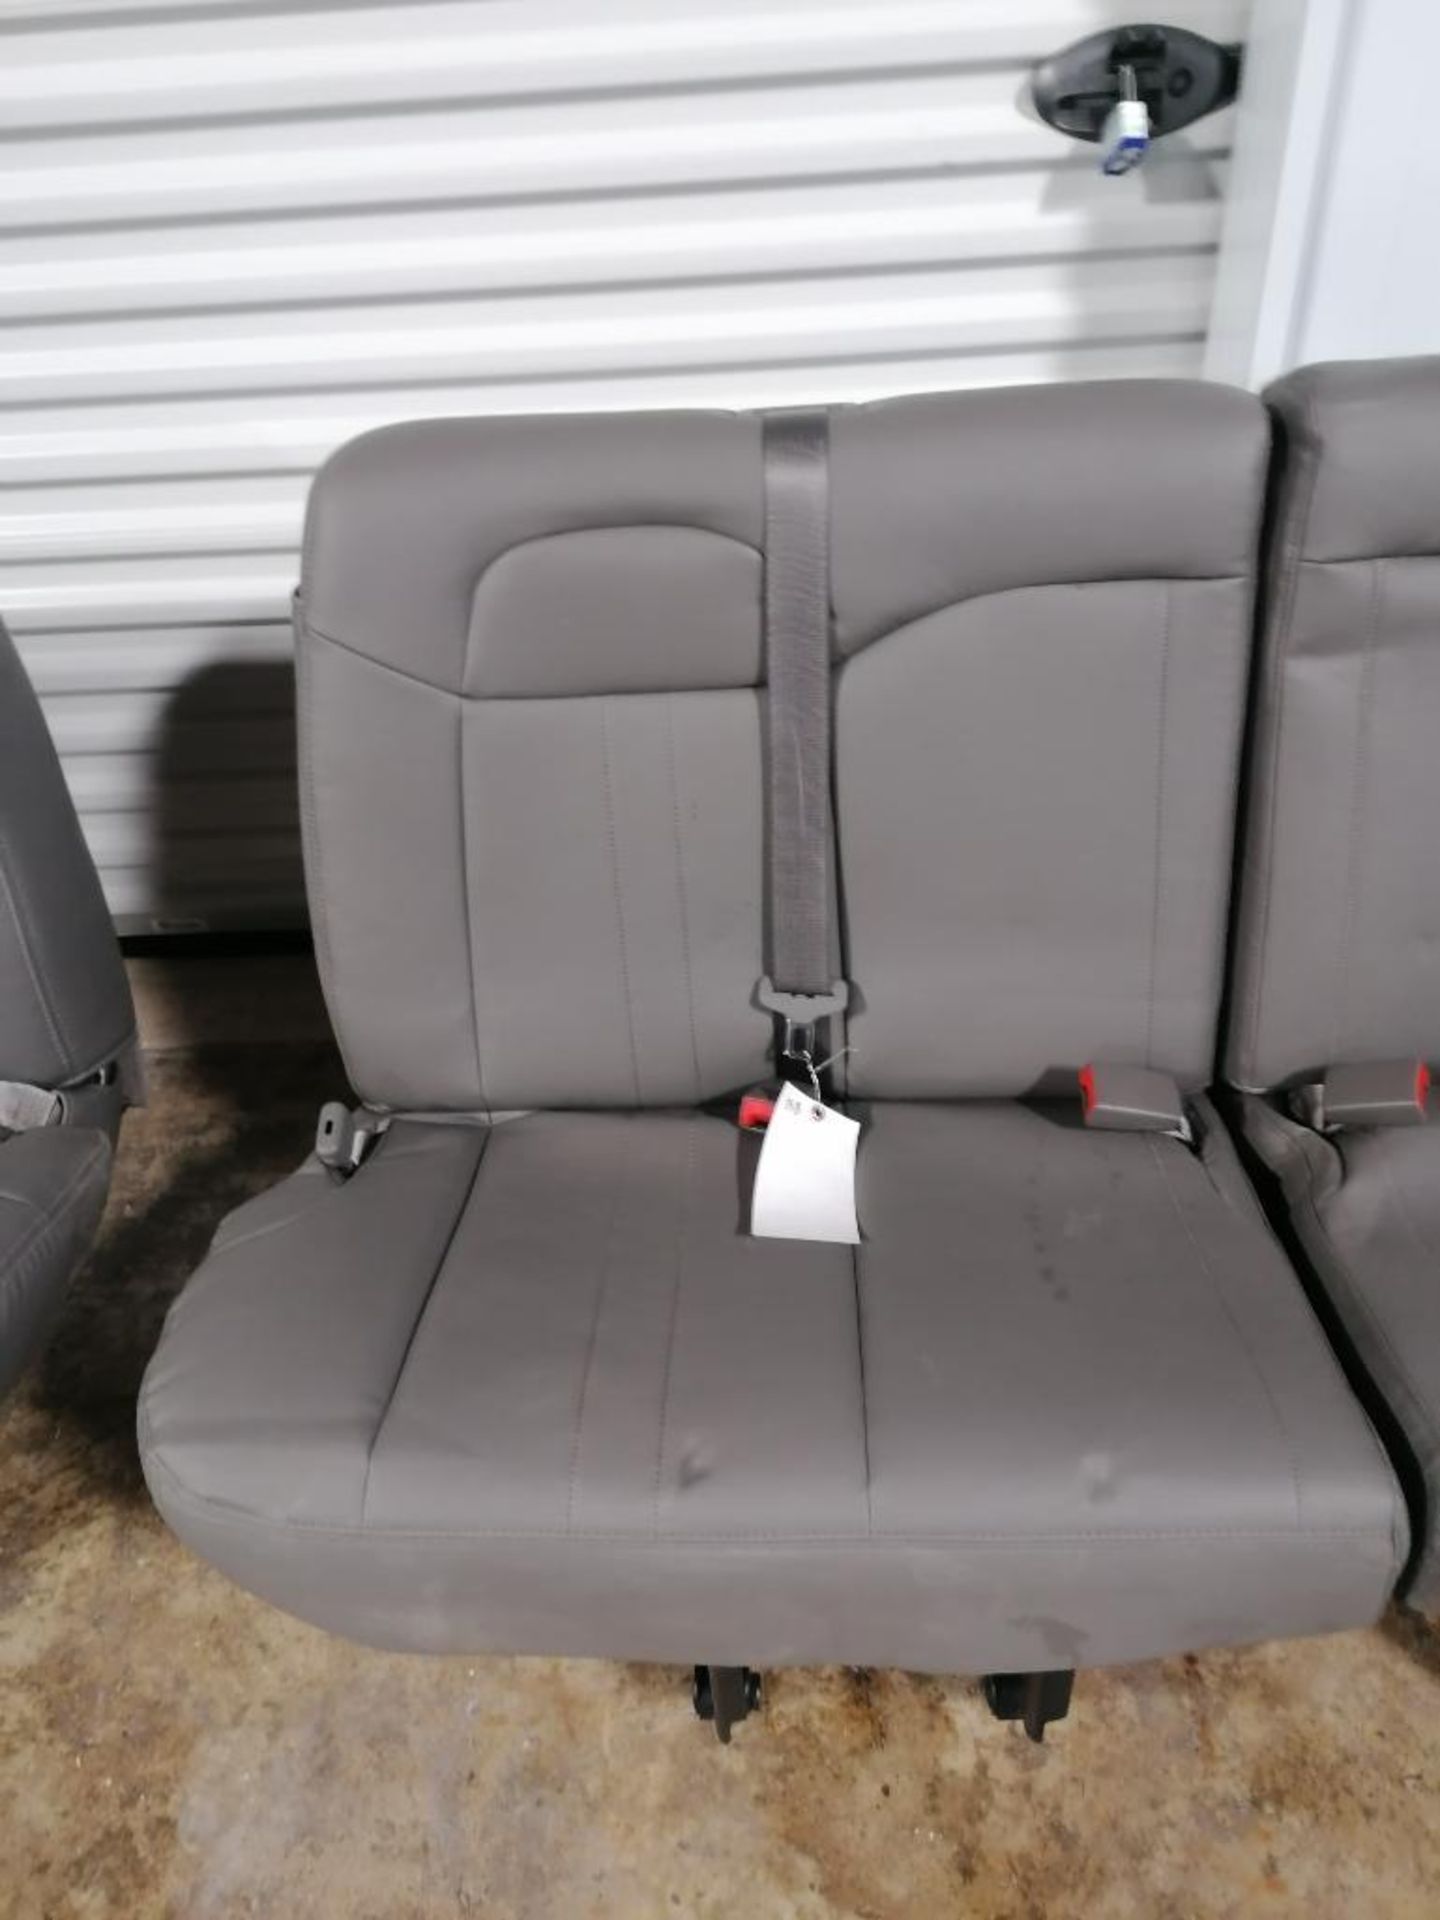 NEW 2021 Chevrolet Express Passenger Seat Row. Located in Mt. Pleasant, IA. - Image 3 of 4